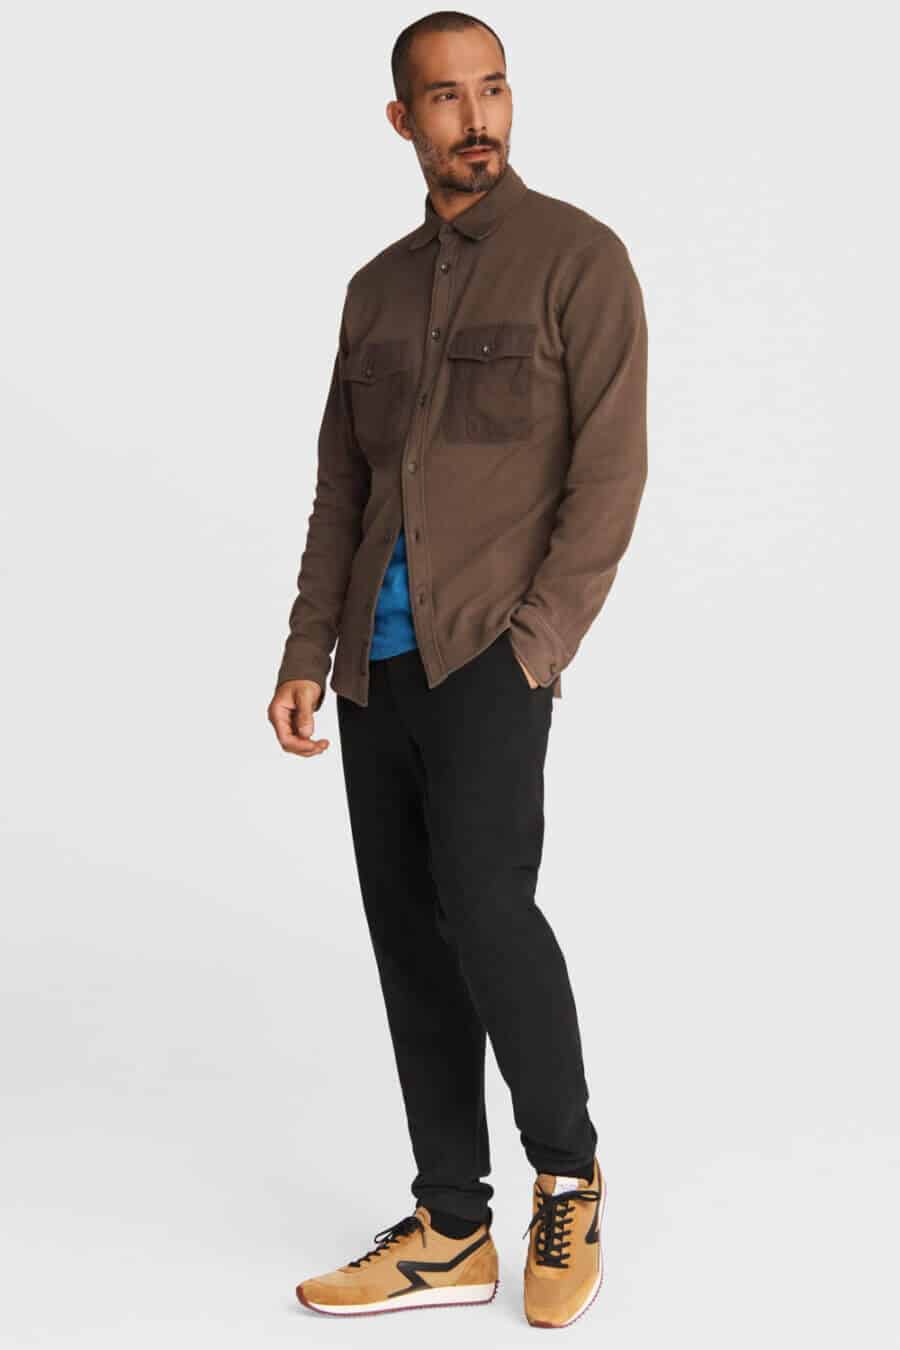 Men's black jeans, retro running shoes and brown overshirt outfit